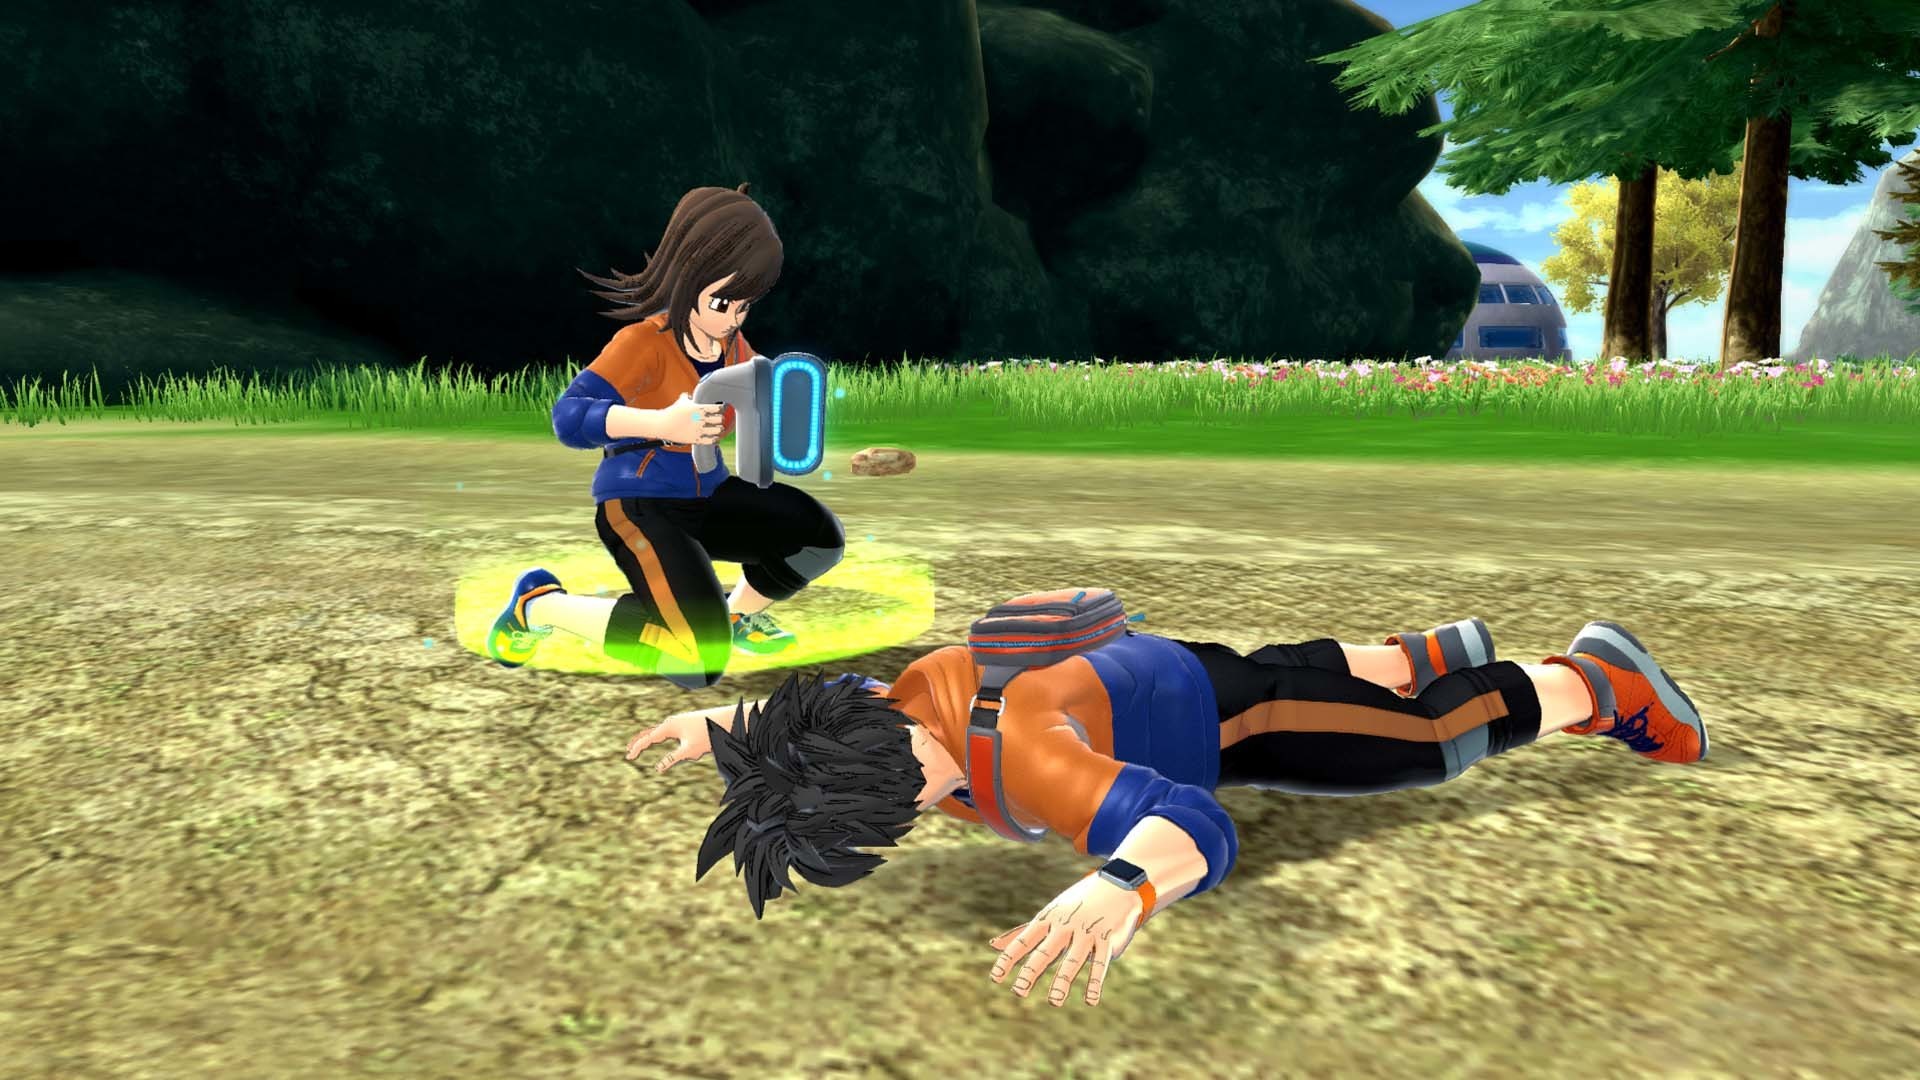 Crossplay is Coming to Dragon Ball The Breakers 